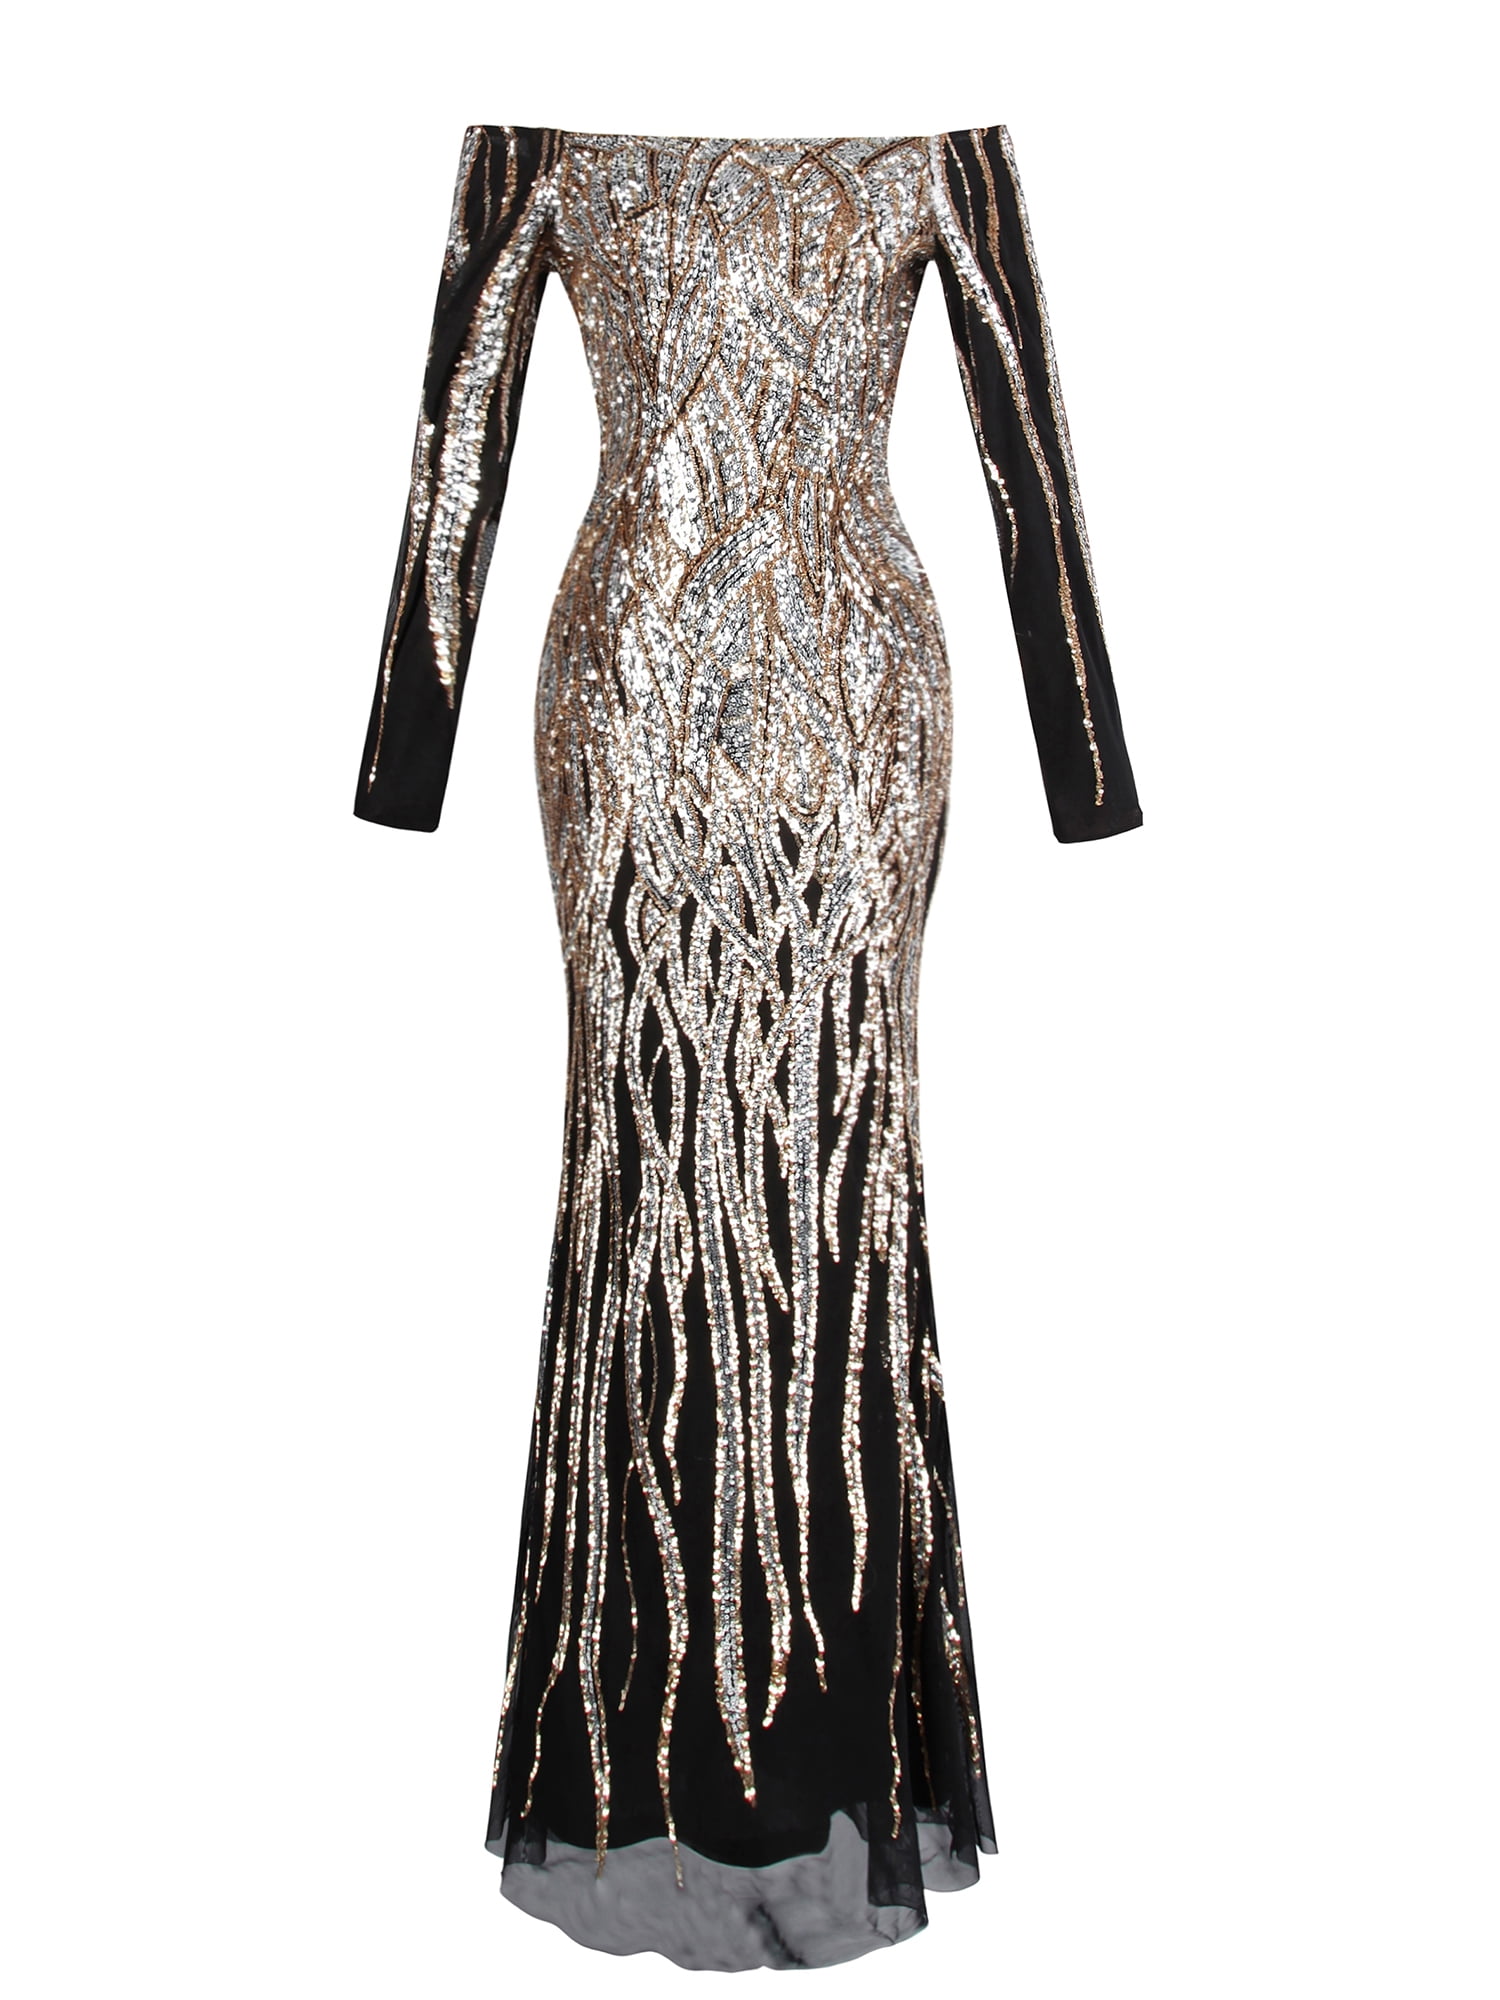 great gatsby ball gown